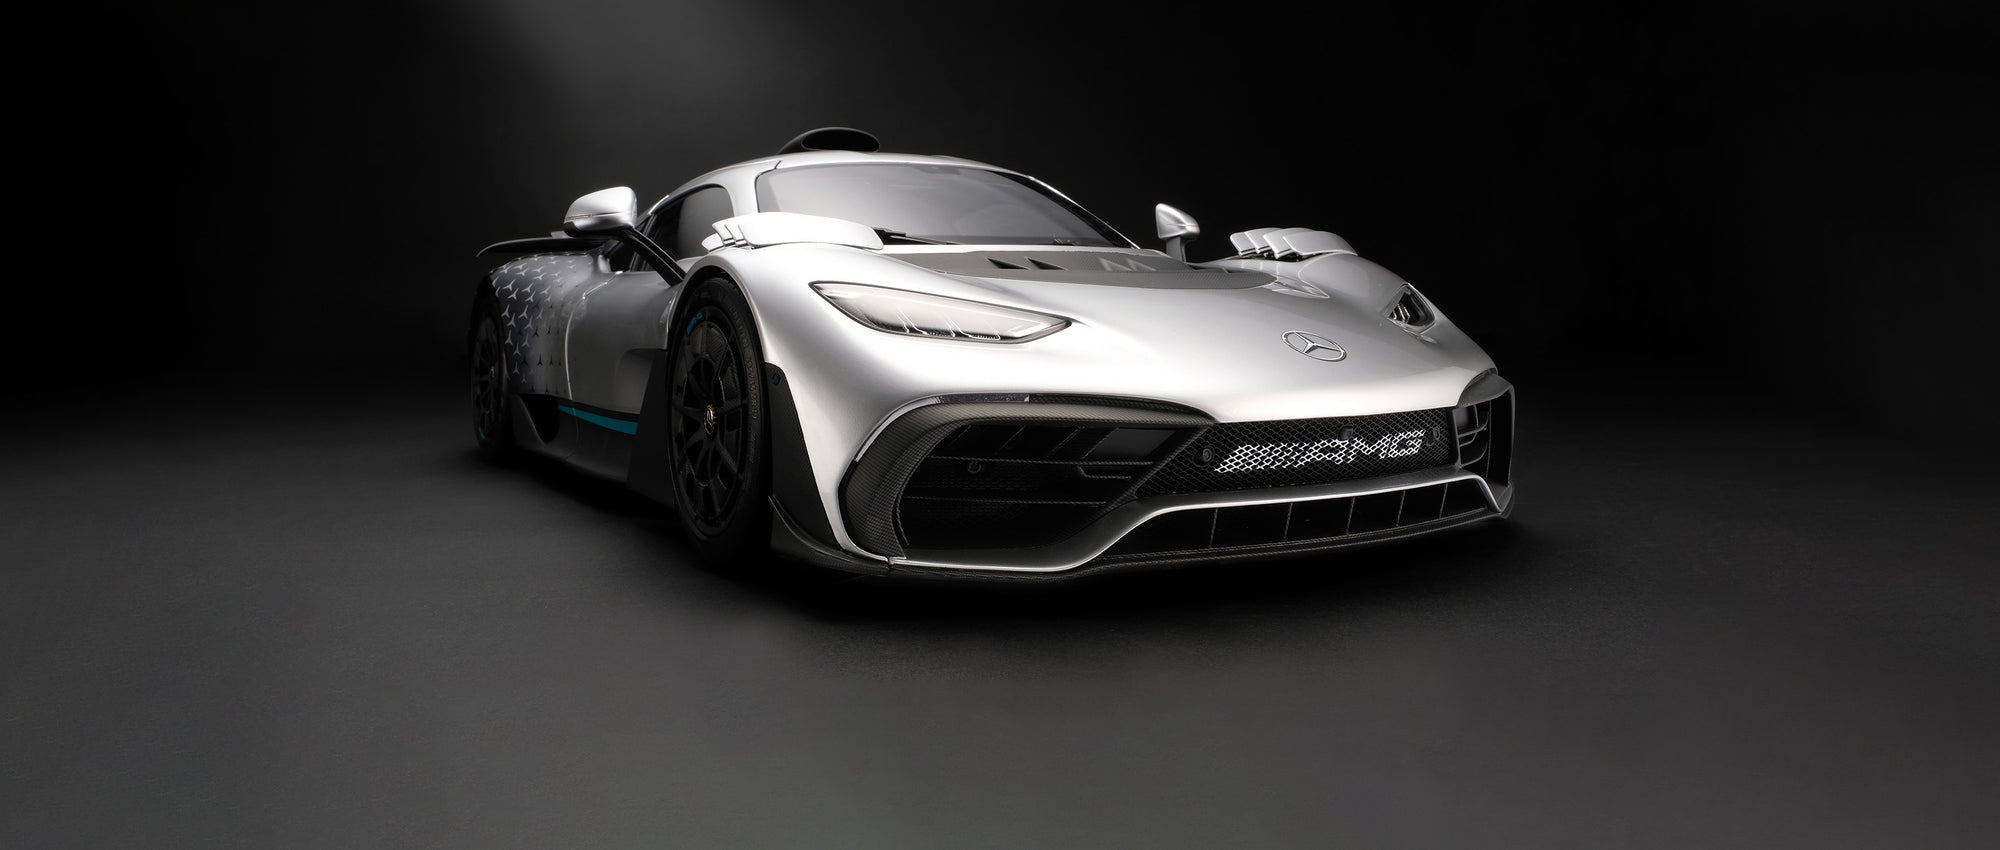 Voiture Miniature Mercedes AMG One 1/18 - ONES IVY MODEL